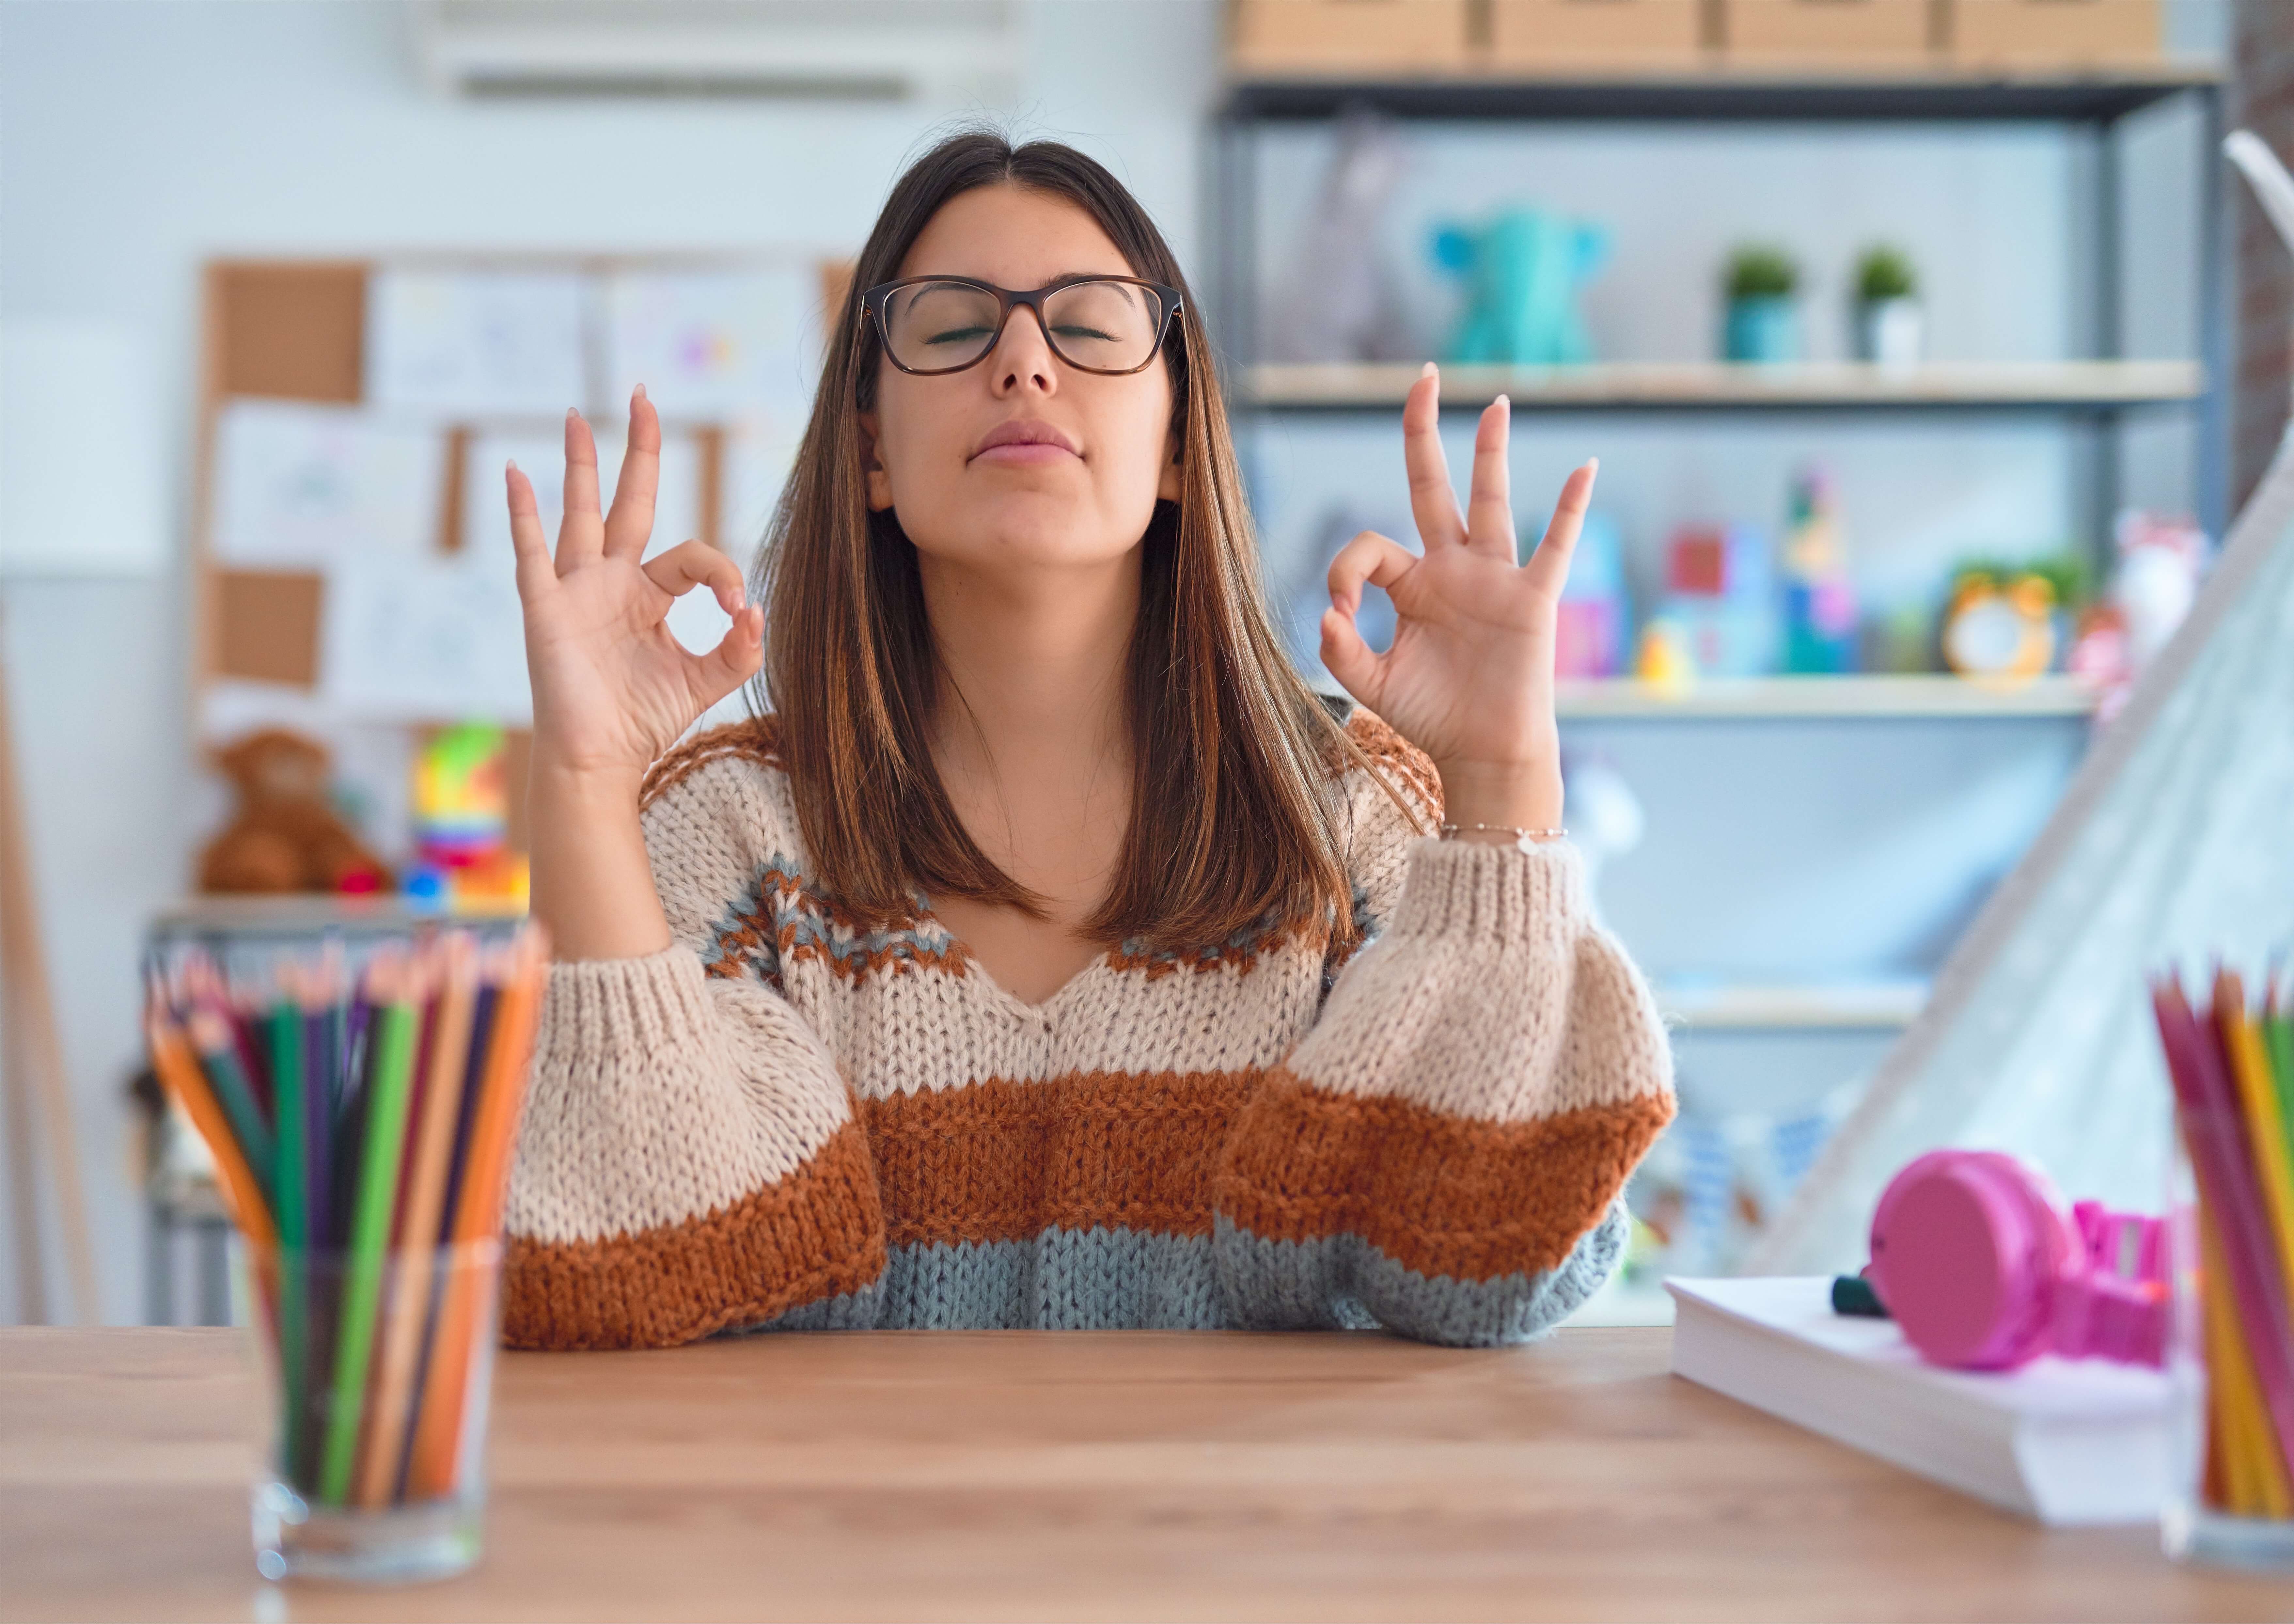 Reduce Stress During the School Day With These Self-Care Tips for Teachers